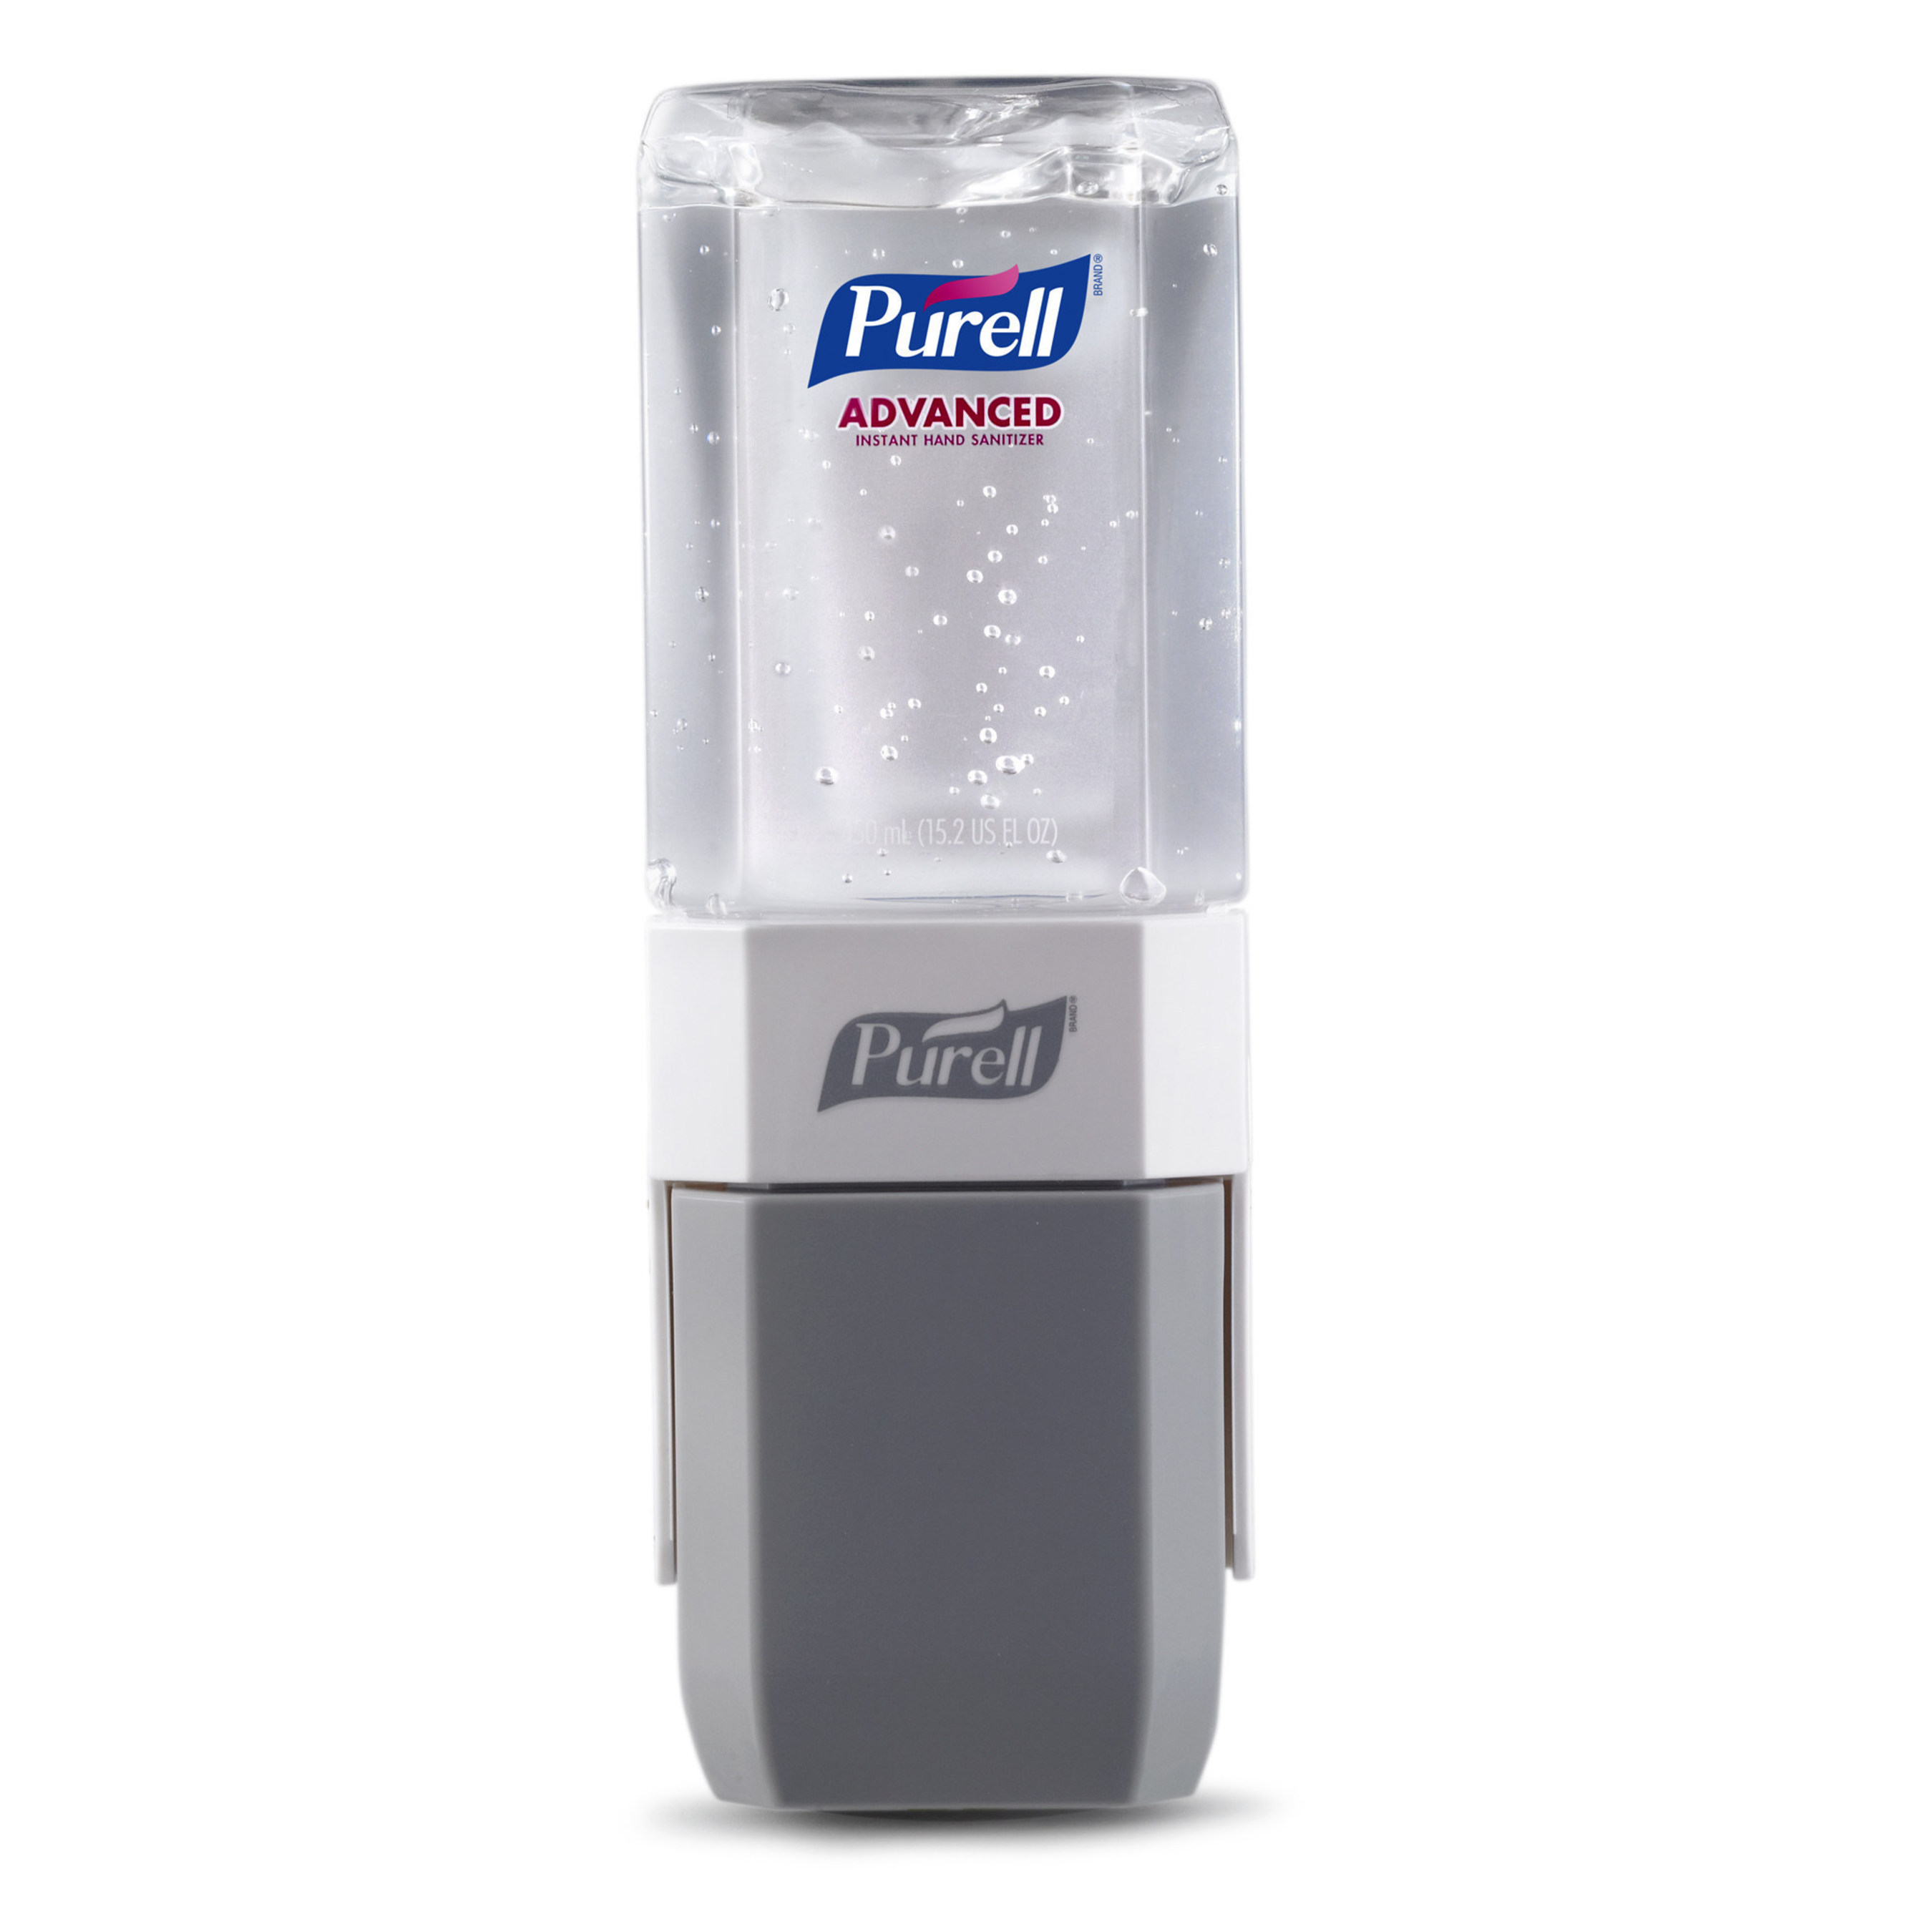 The PURELL ES Everywhere System makes hand hygiene accessible. It is designed to fit your world, your health and well-being needs and your way of life.